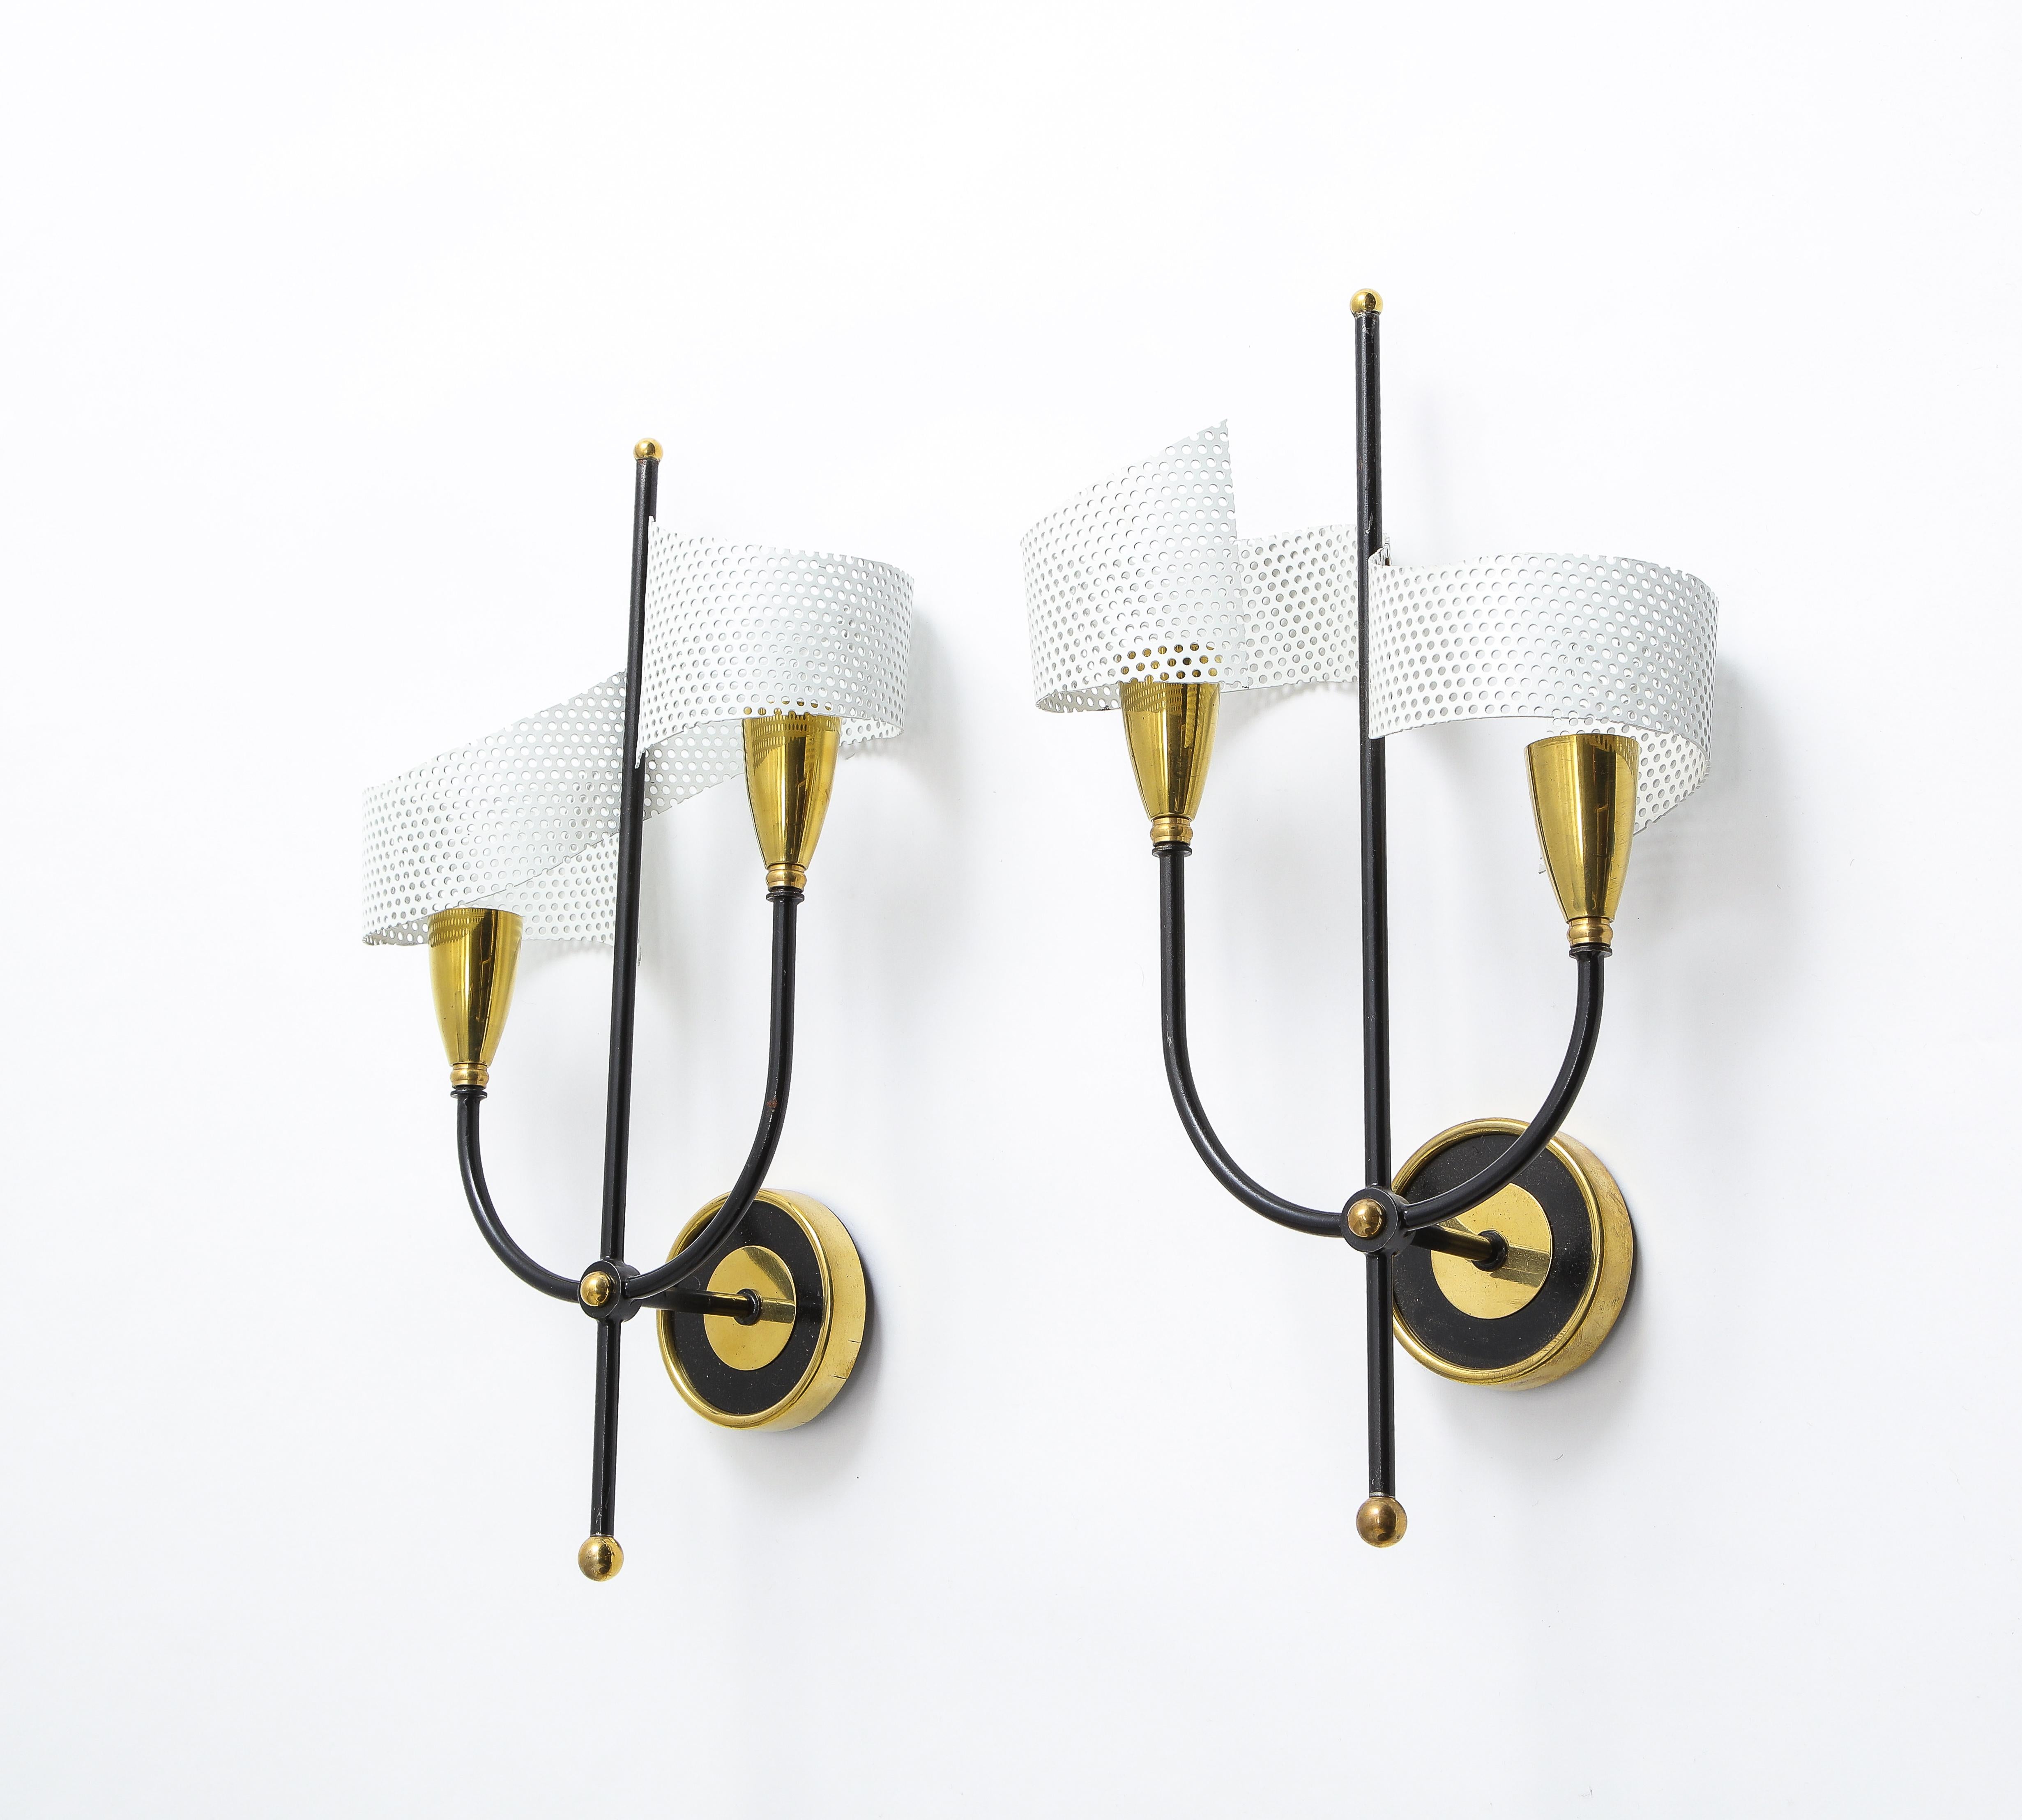 Mid-Century Modern Pair of Scrolled Sconces in Brass and Aluminium by Mathieu, France, 1950s For Sale